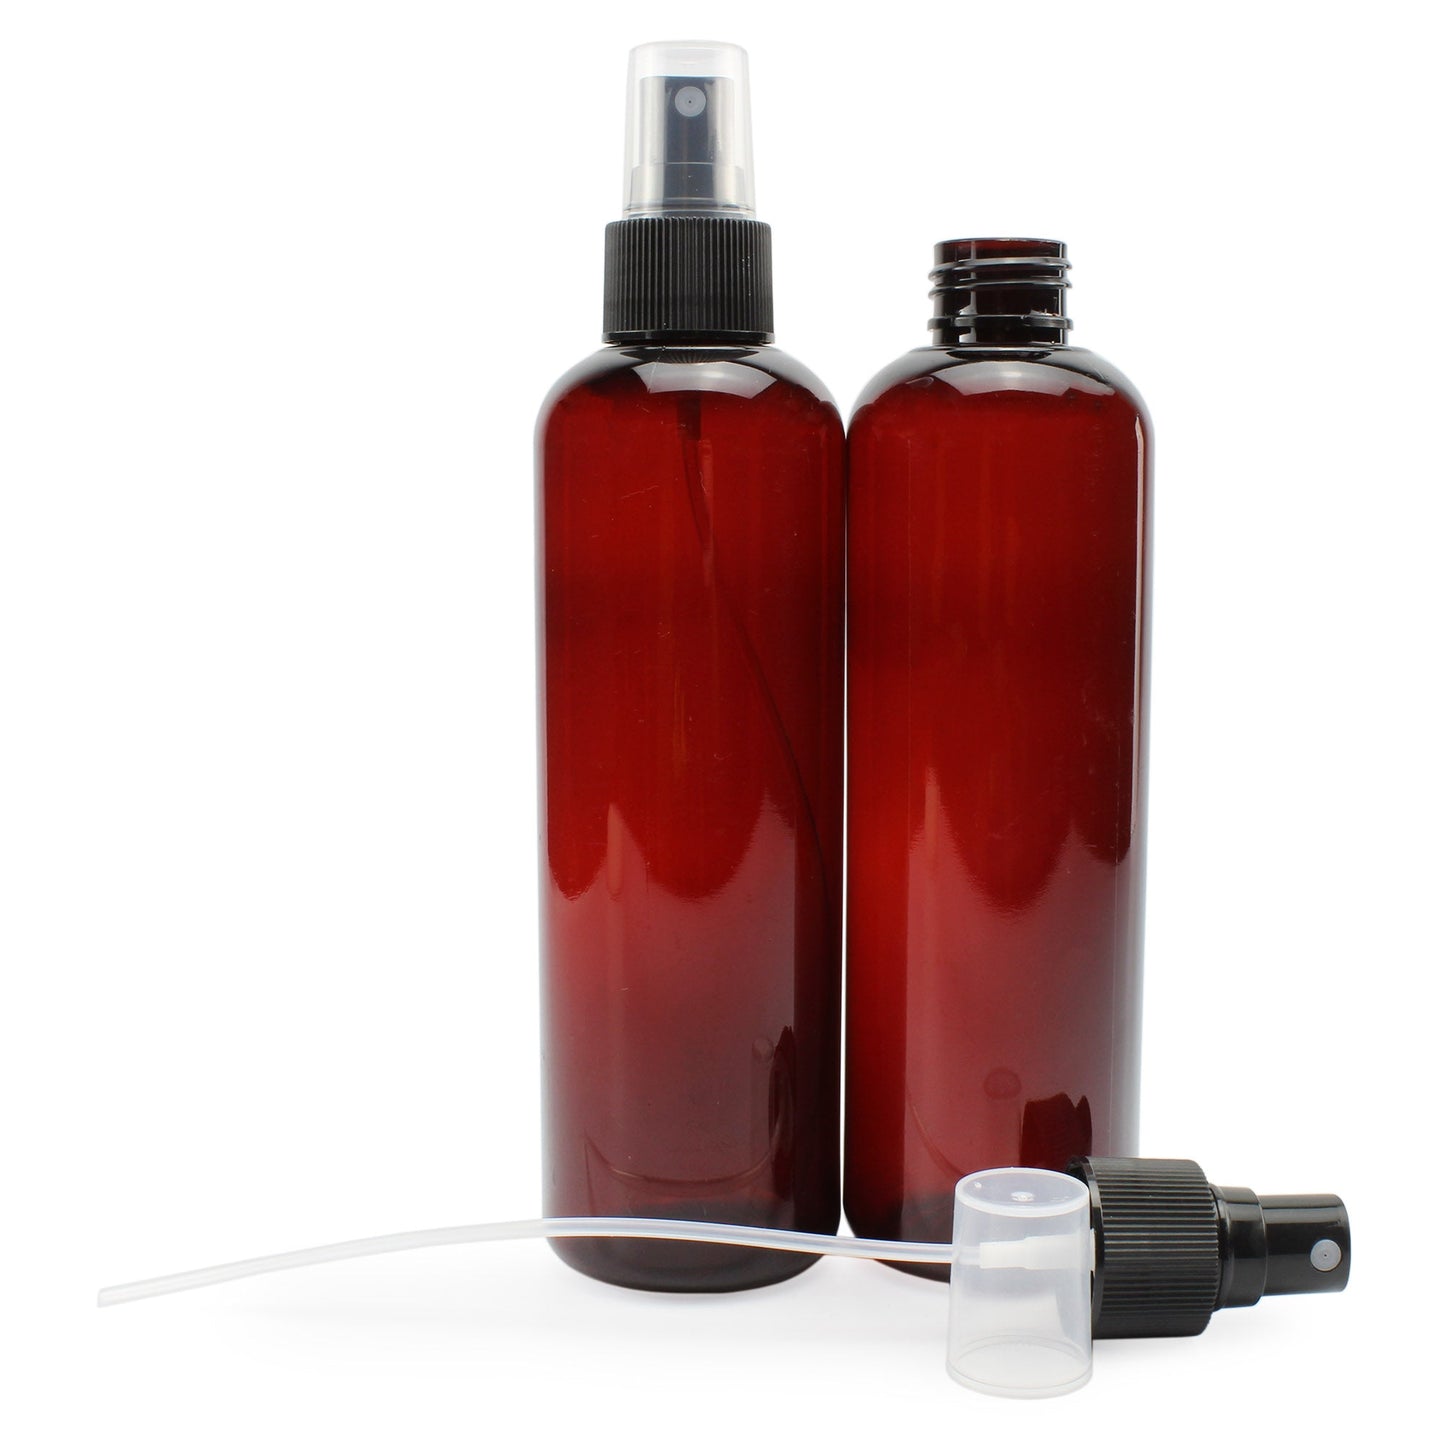 8oz Amber Brown Plastic Spray Bottles with Fine Mist Atomizers (6-Pack) - sh1417cb0Brown